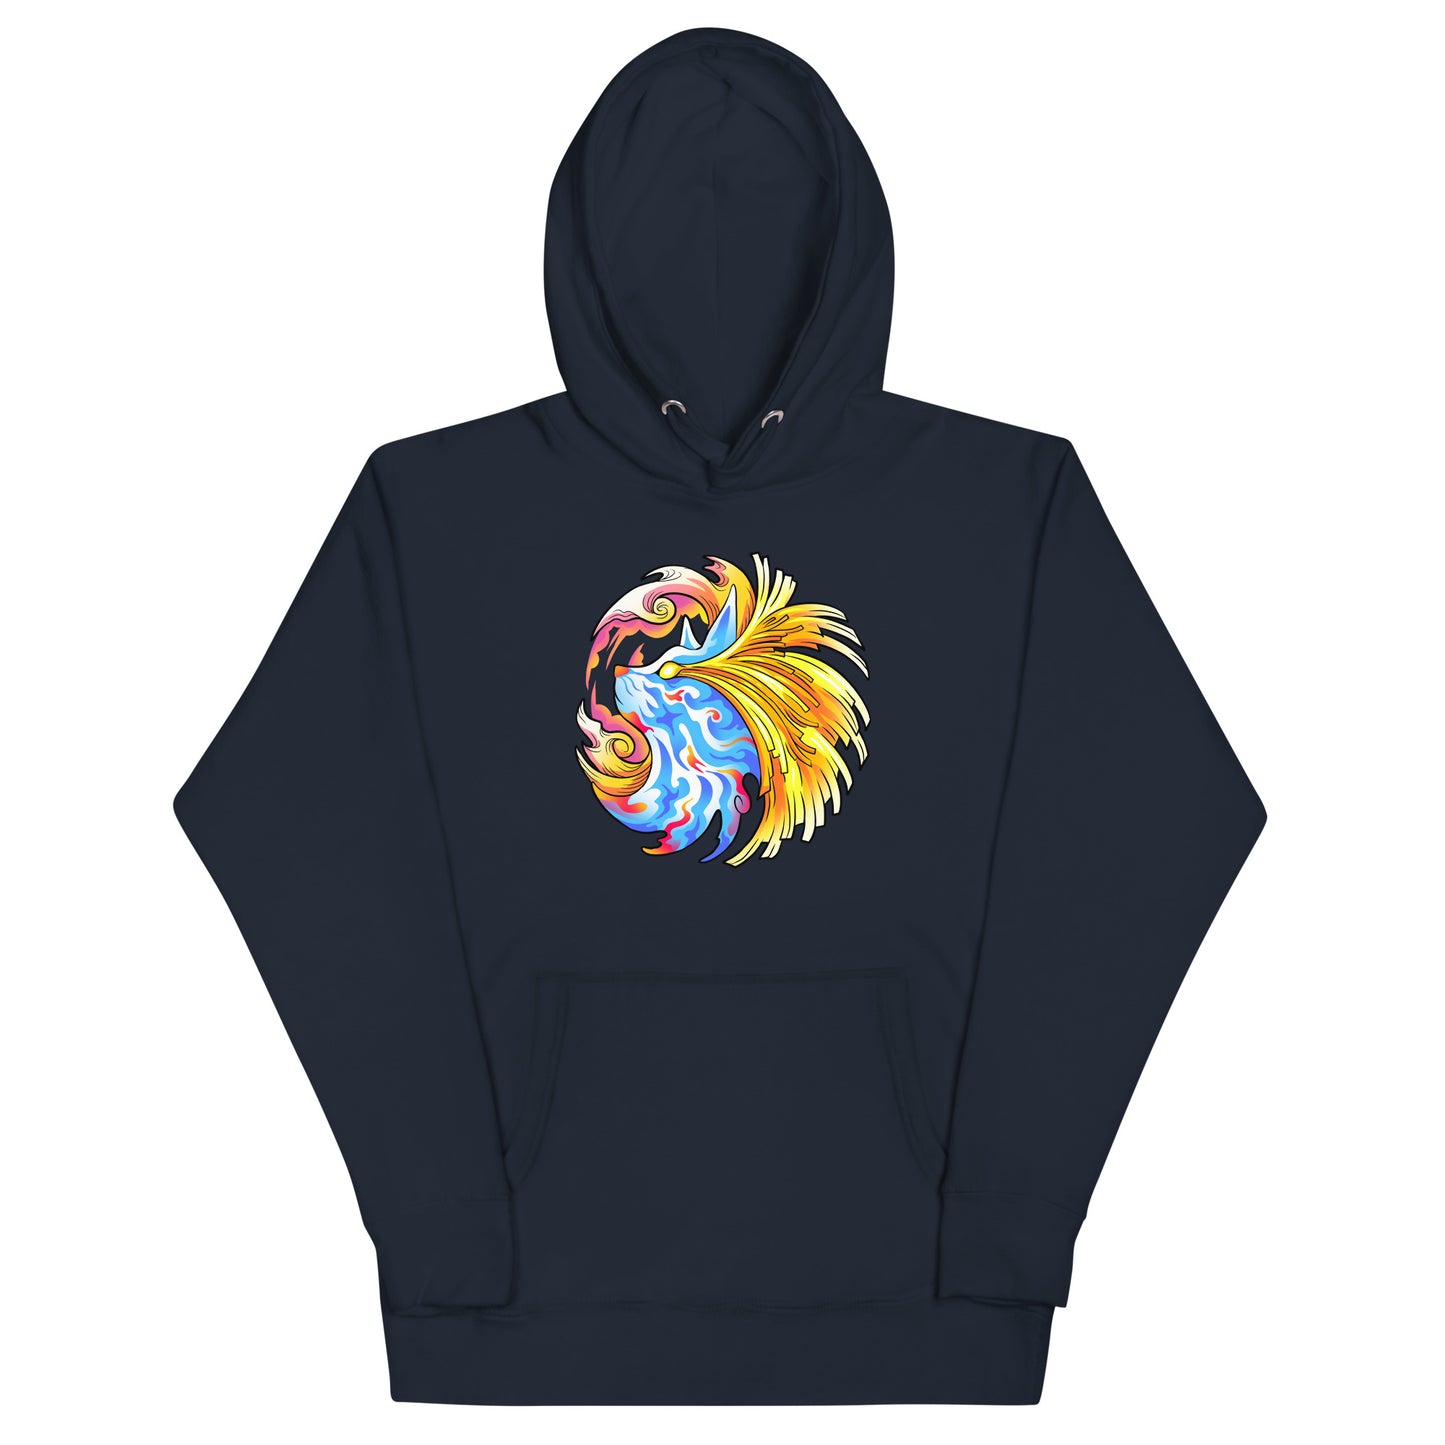 Pharaoh Zebady navy hoodie. Psychedelic blue and white cat with energy beams streaming out his eyes and around the head.